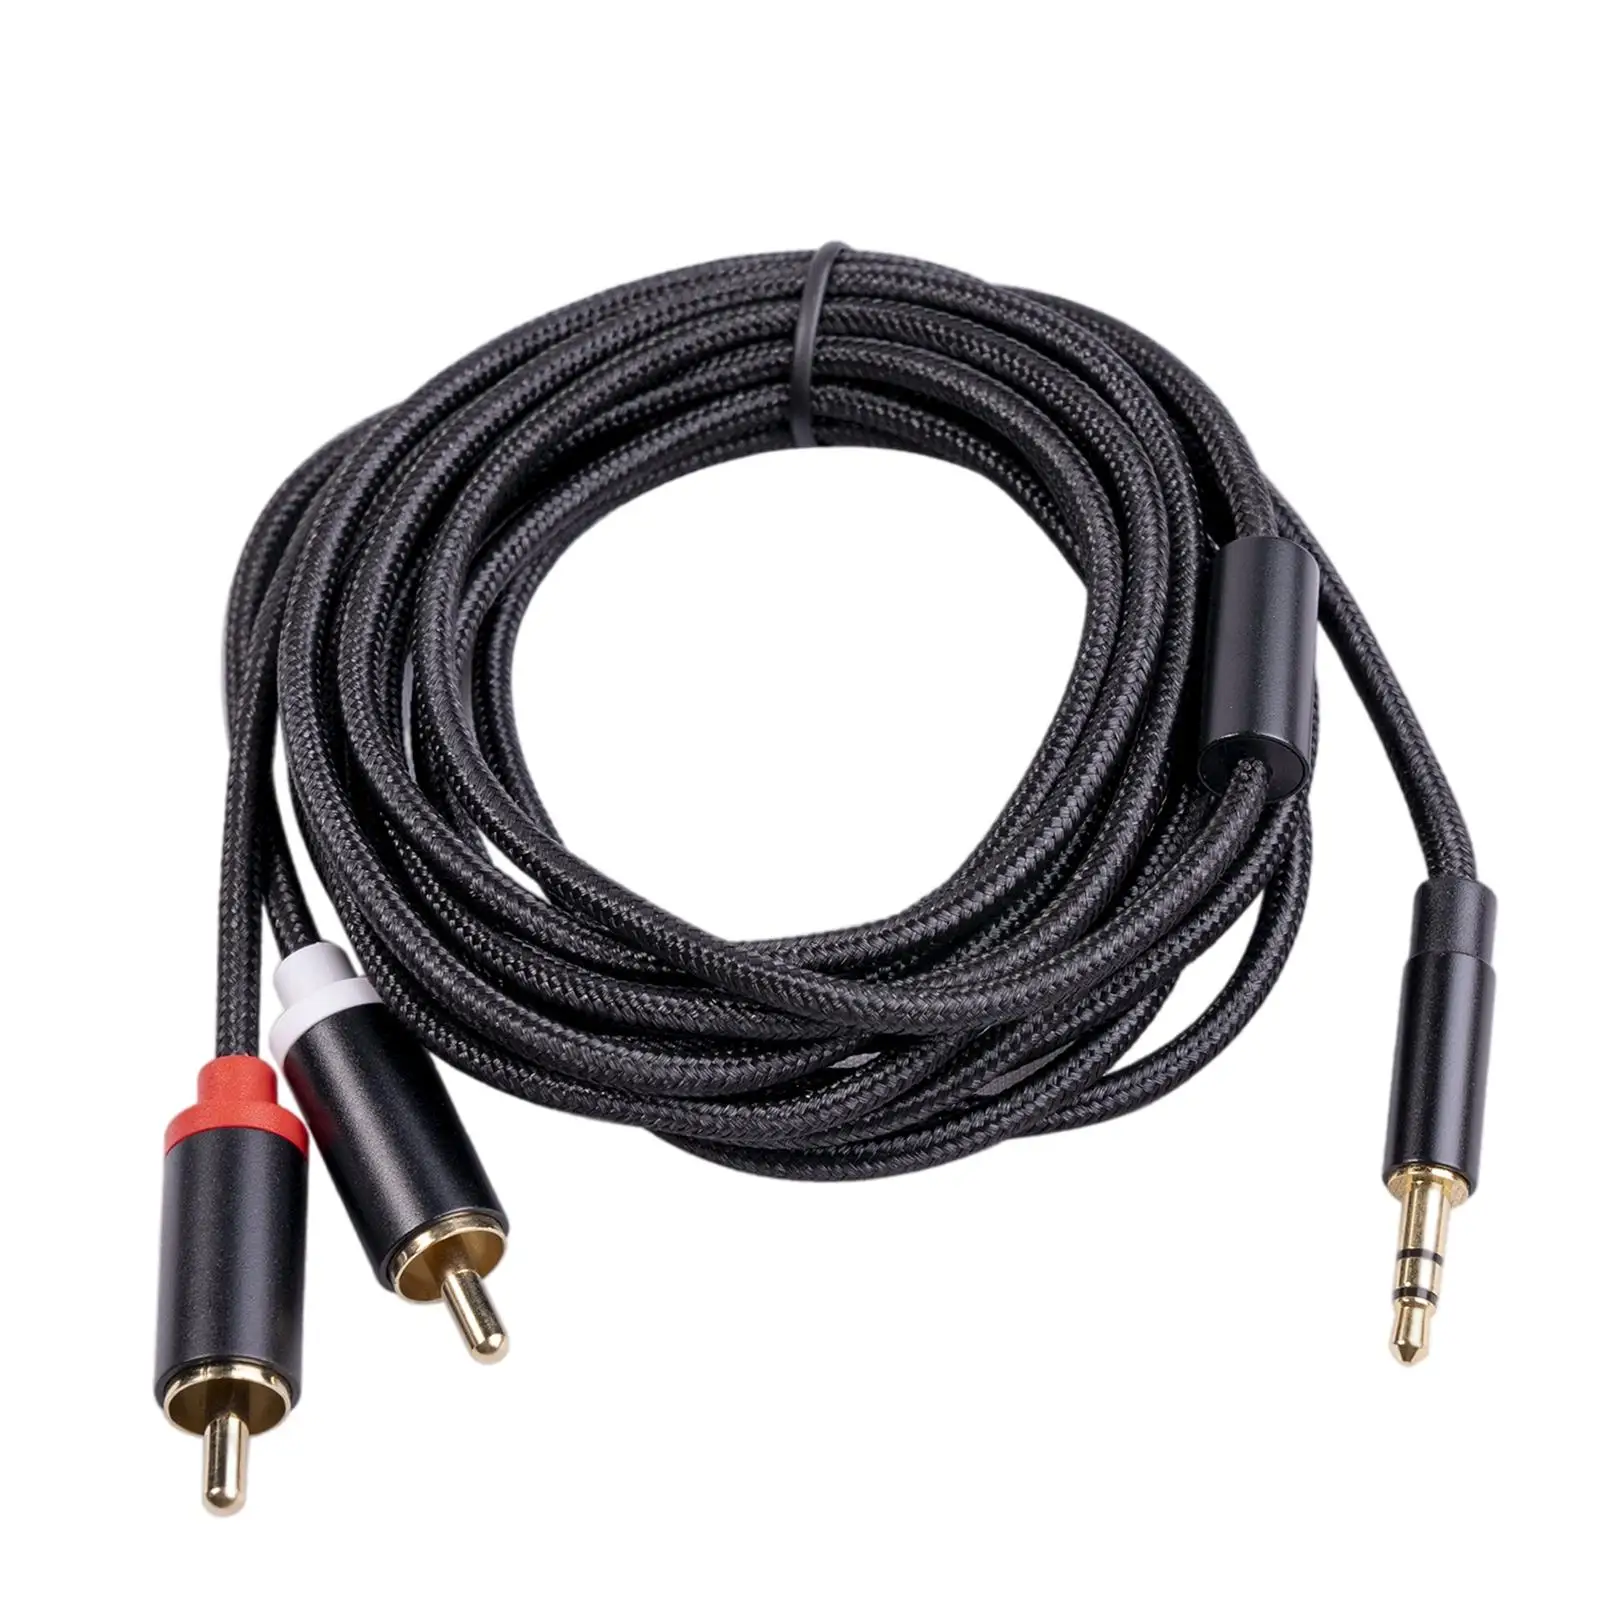 Audio Cable 1/1.8/3M Length 3.5mm Jack Male MP 3 Player Extender Mic RCA Cable Splitter Audio for Notebook Audio Line Cord Home